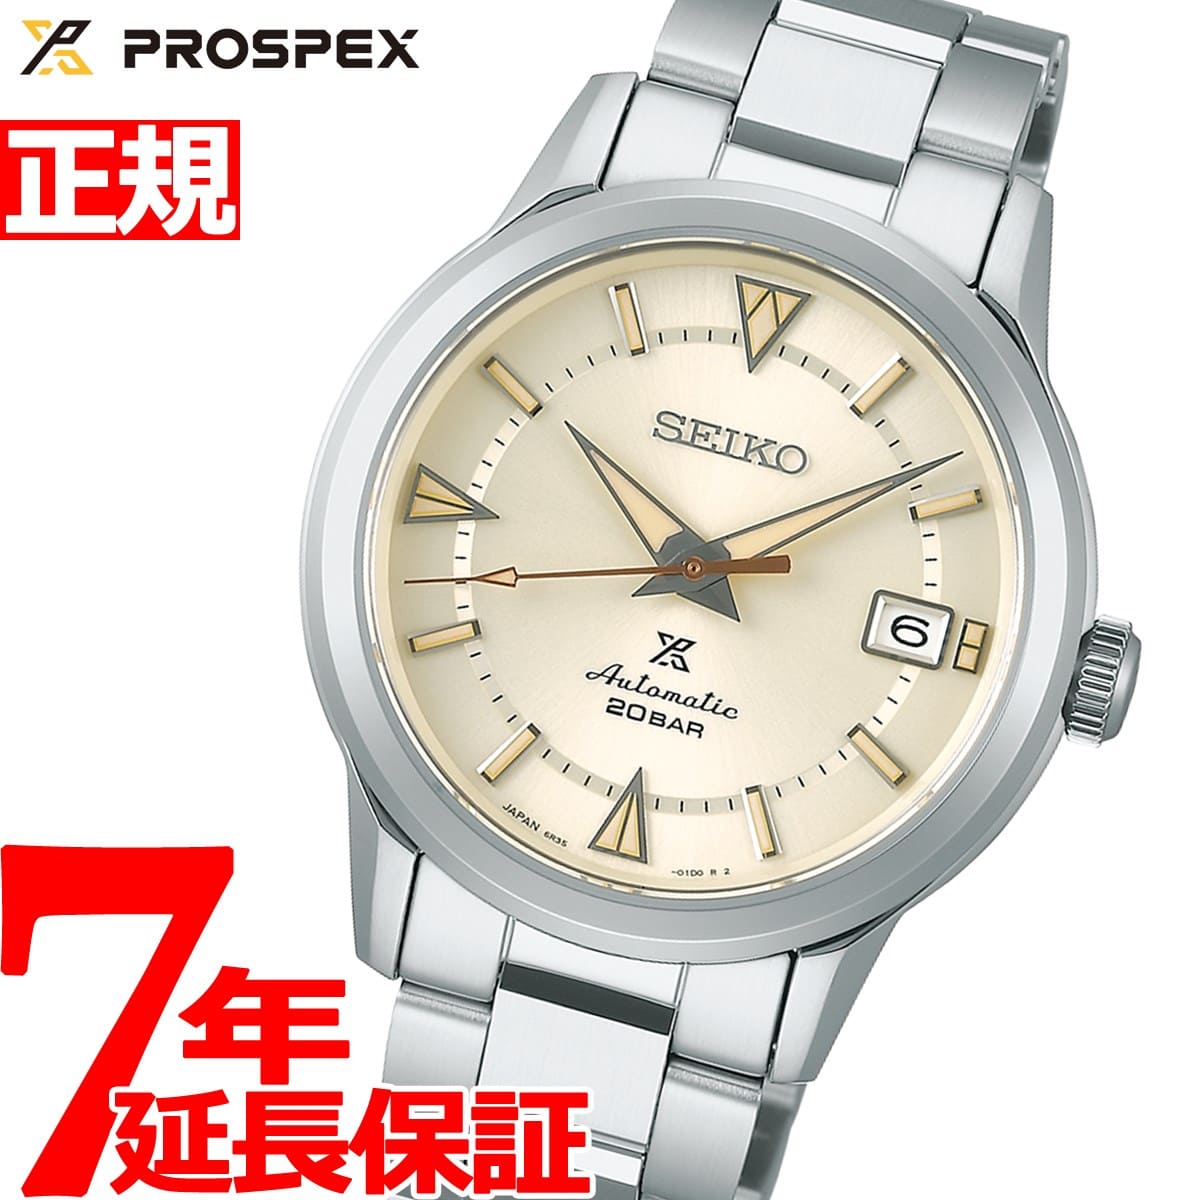 New]0:00 ...! up to  times! It is the SBDC145 SEIKO PROSPEX 2021 new  work for exclusive use of the SEIKO Pross pecks Alpinist 1959 first  Alpinist modern design distribution model mens